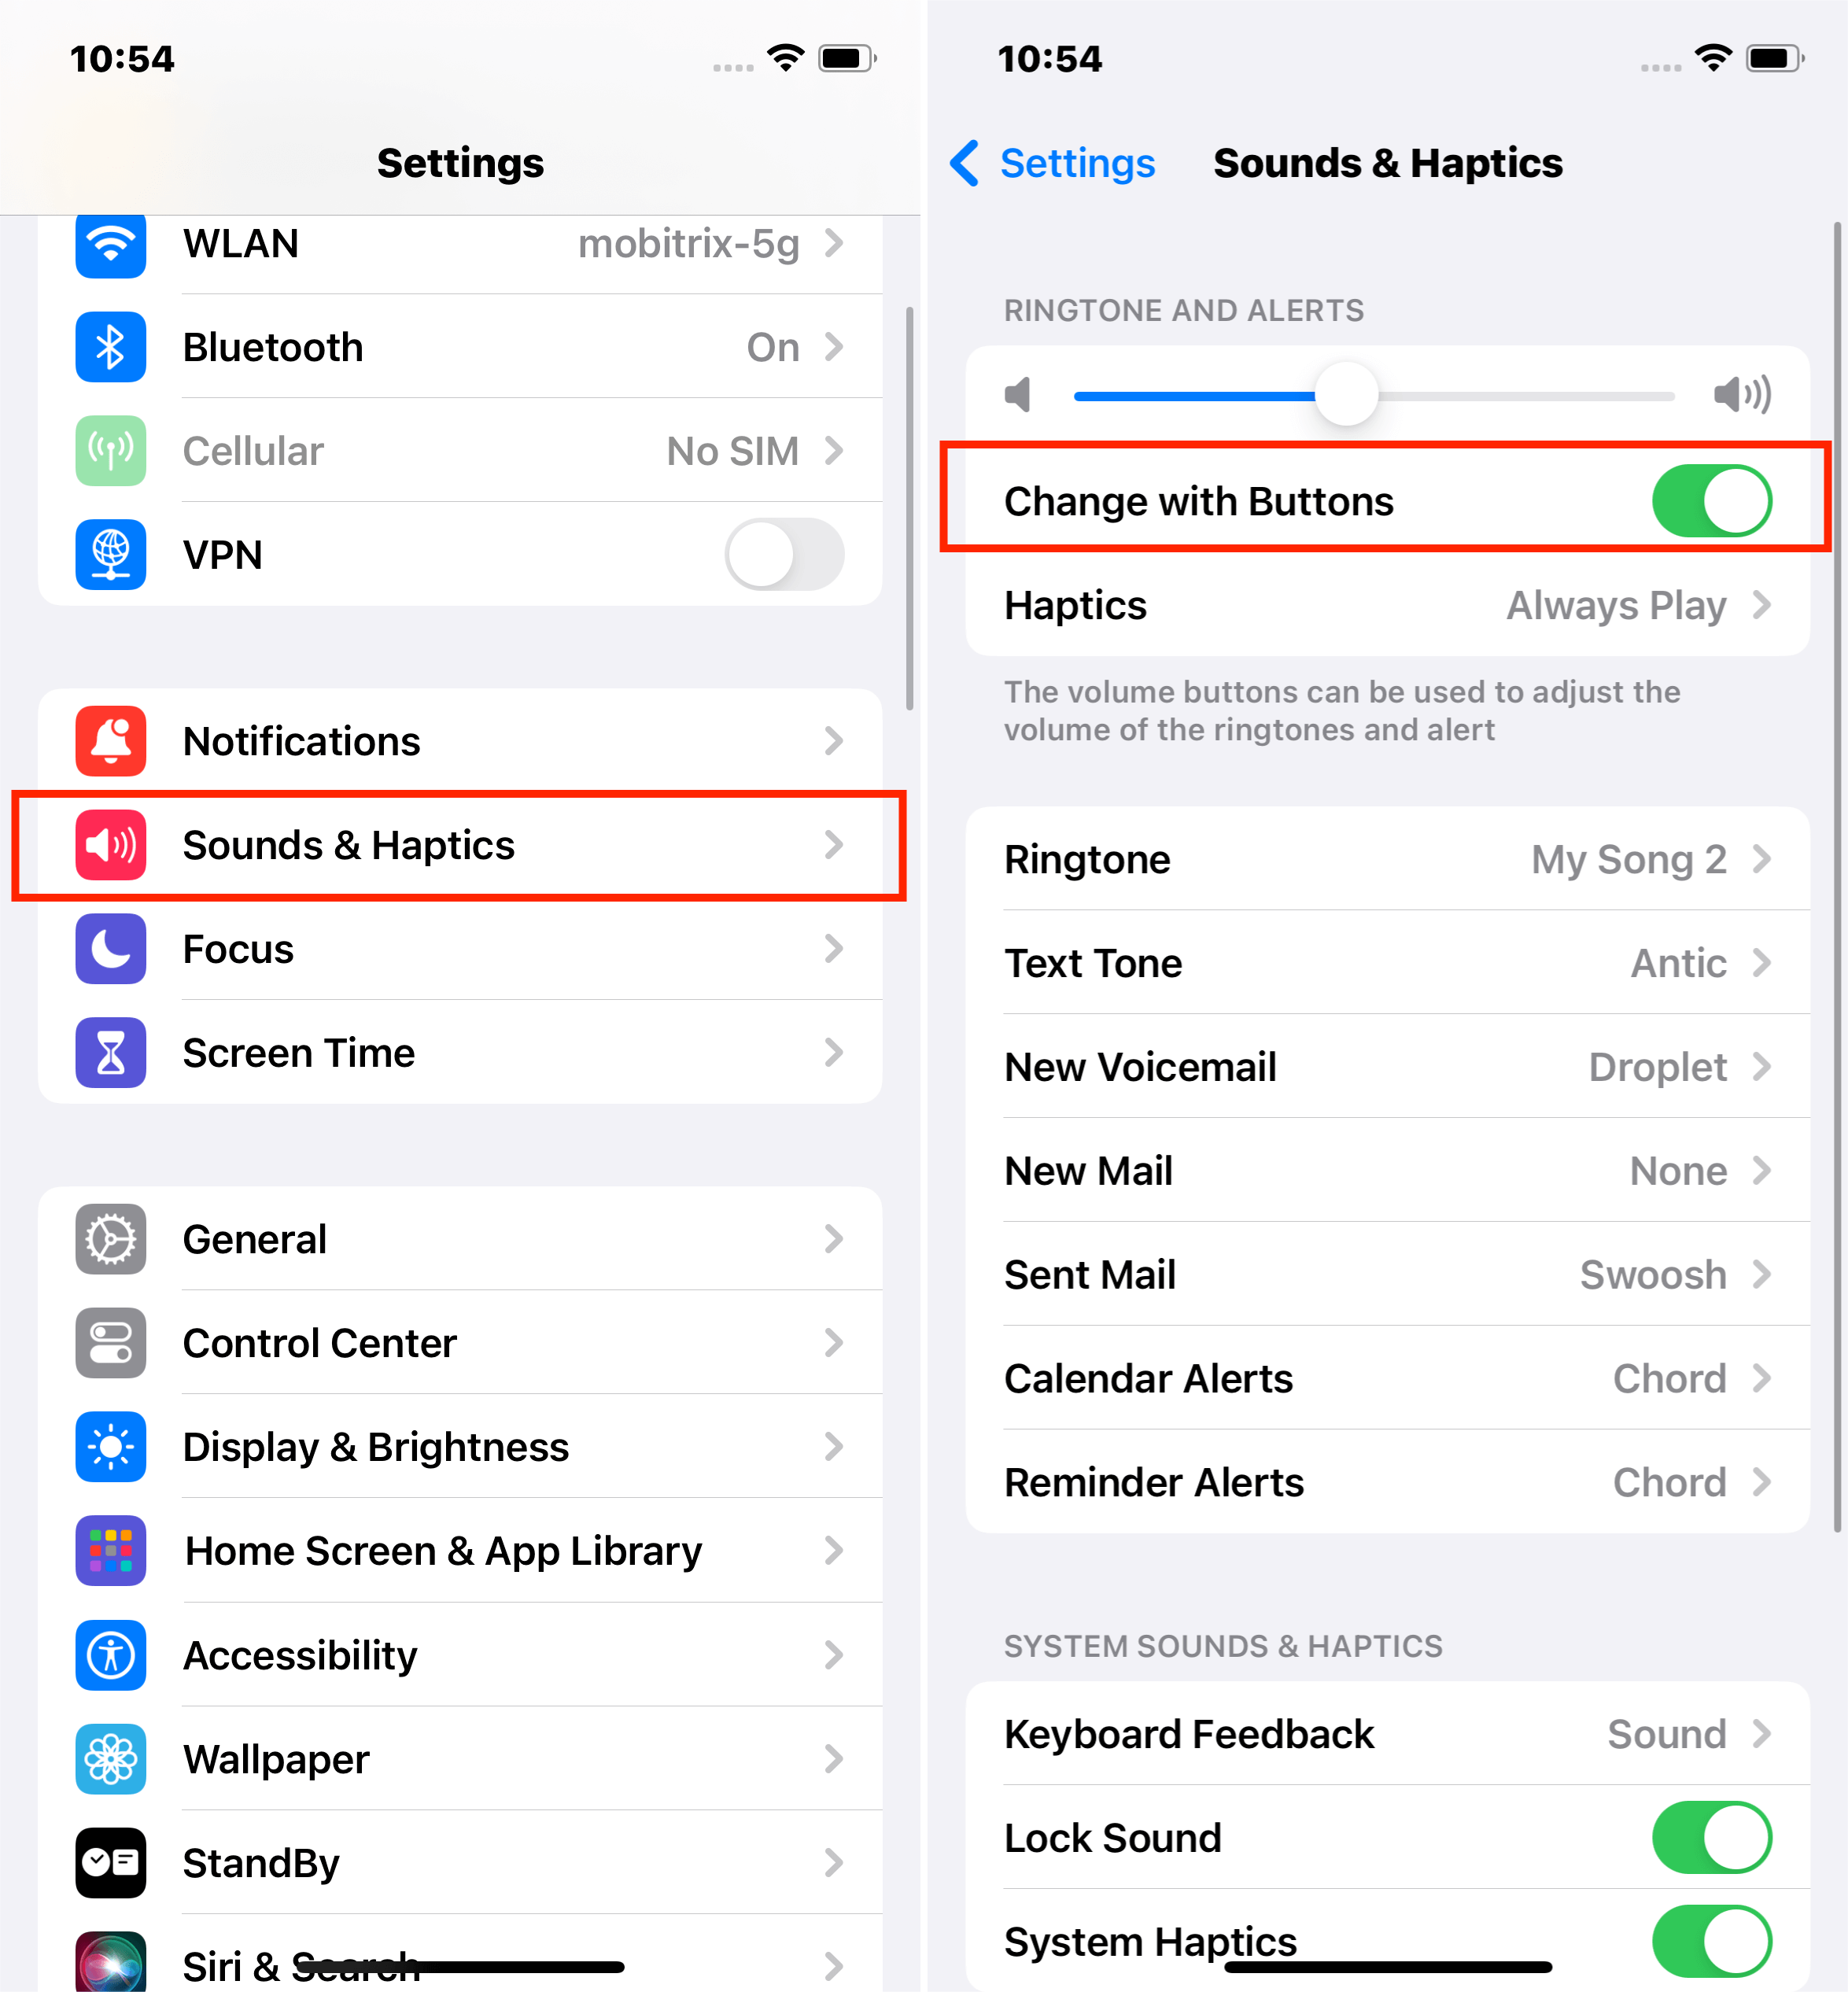 Enable Change Volume with Buttons Option